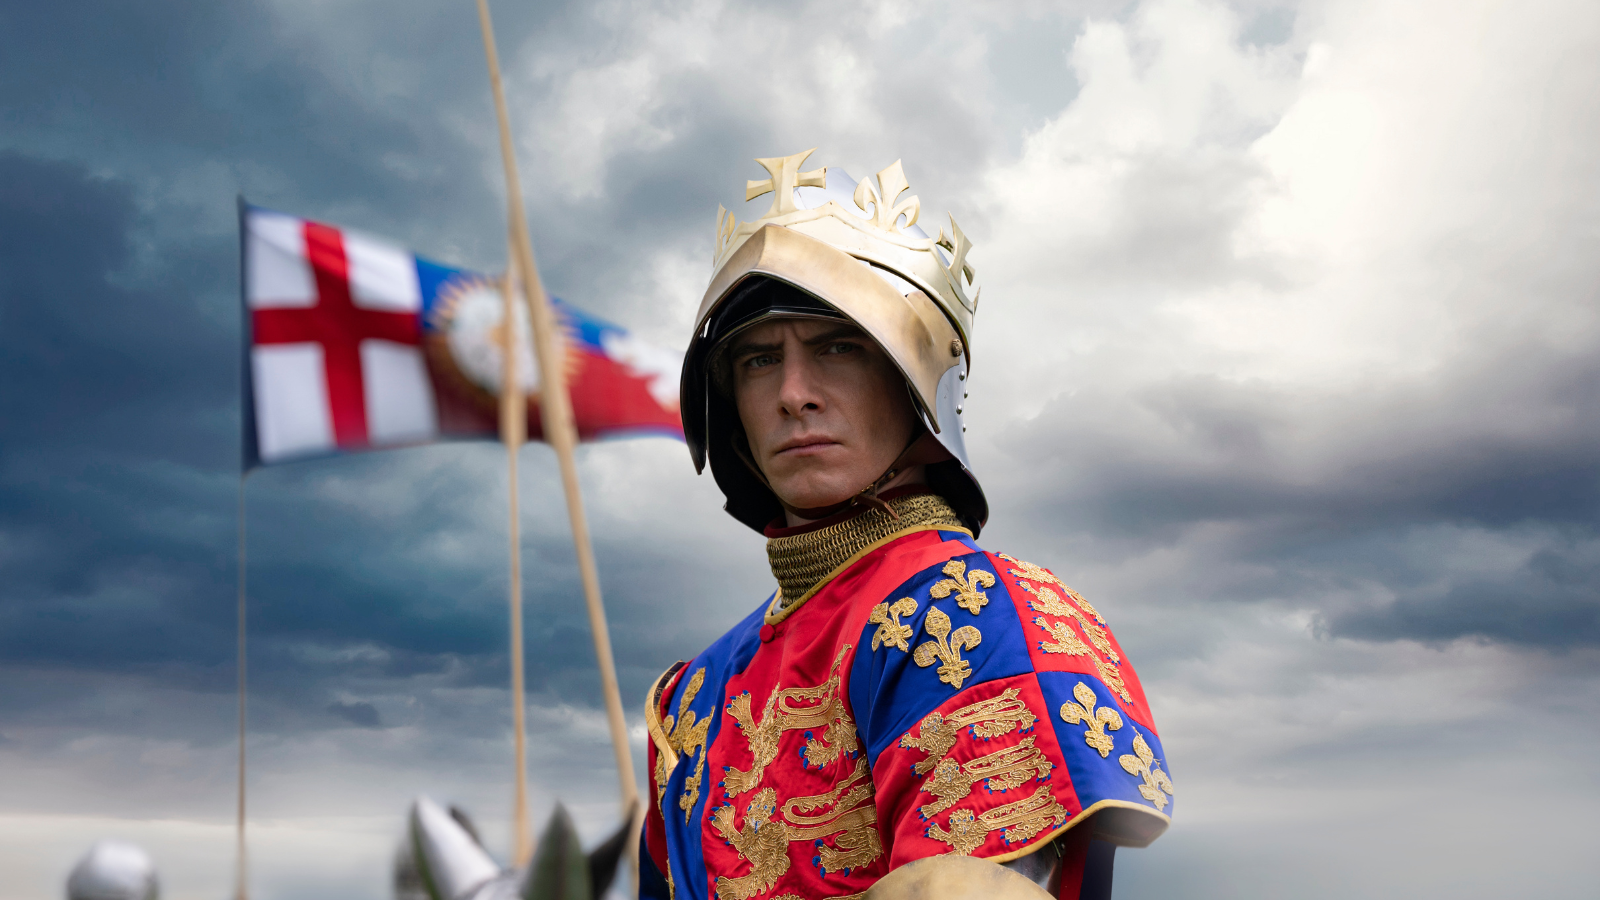 A still from The Lost King. Harry Lloyd dressed in Tudor fashion including a helmet, crown and chainmail, sitting on a horse.